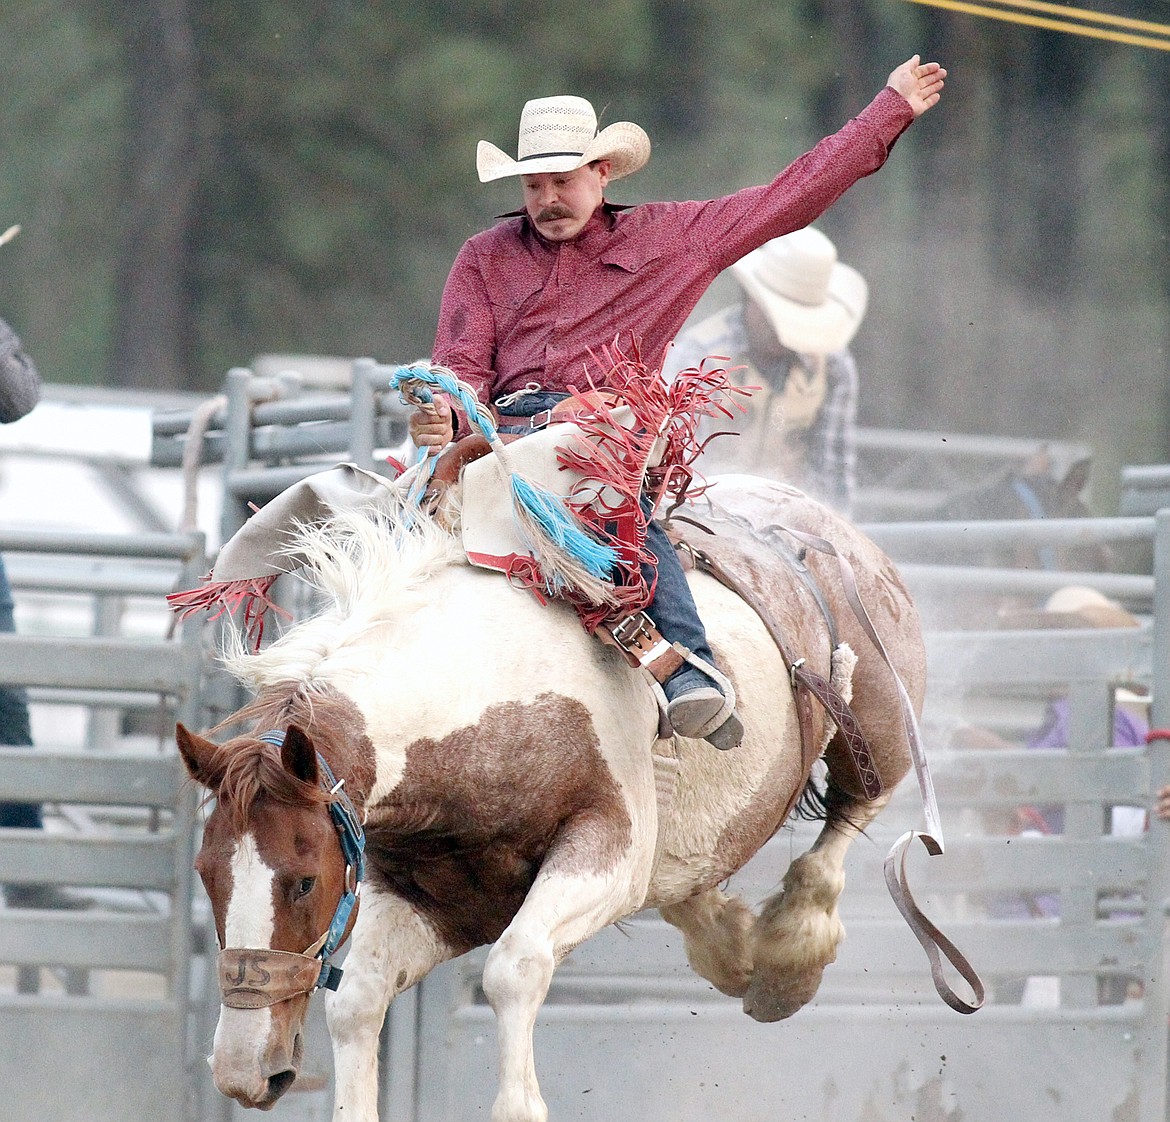 Libby's Jason Colclough aboard the horse known as "Ruby Valley" for a ride worth 63 points during the saddle bronc event Saturday evening.